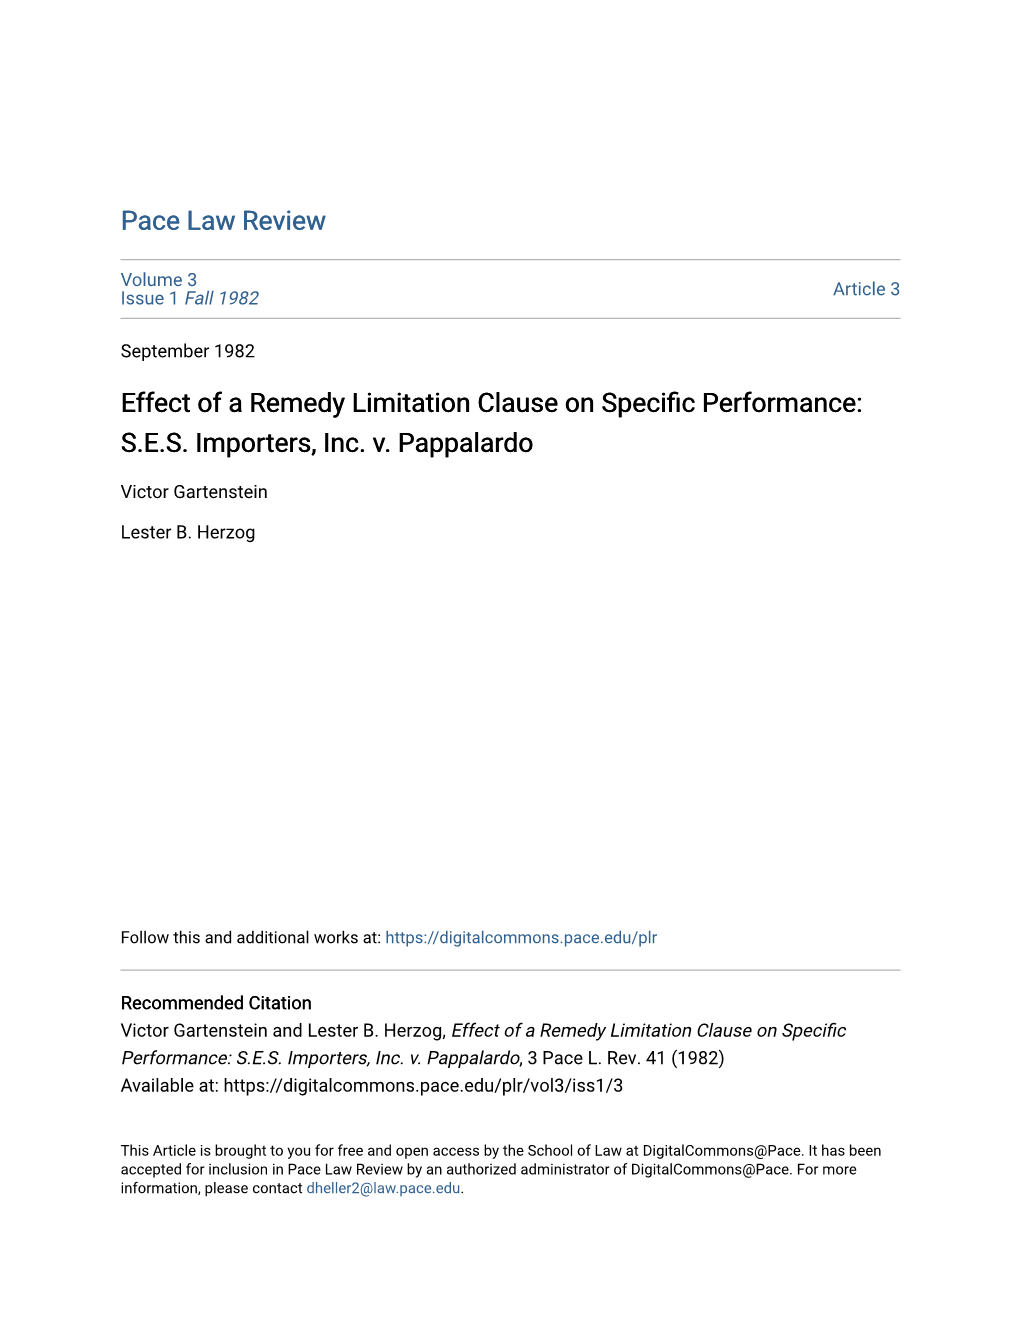 Effect of a Remedy Limitation Clause on Specific Performance: S.E.S